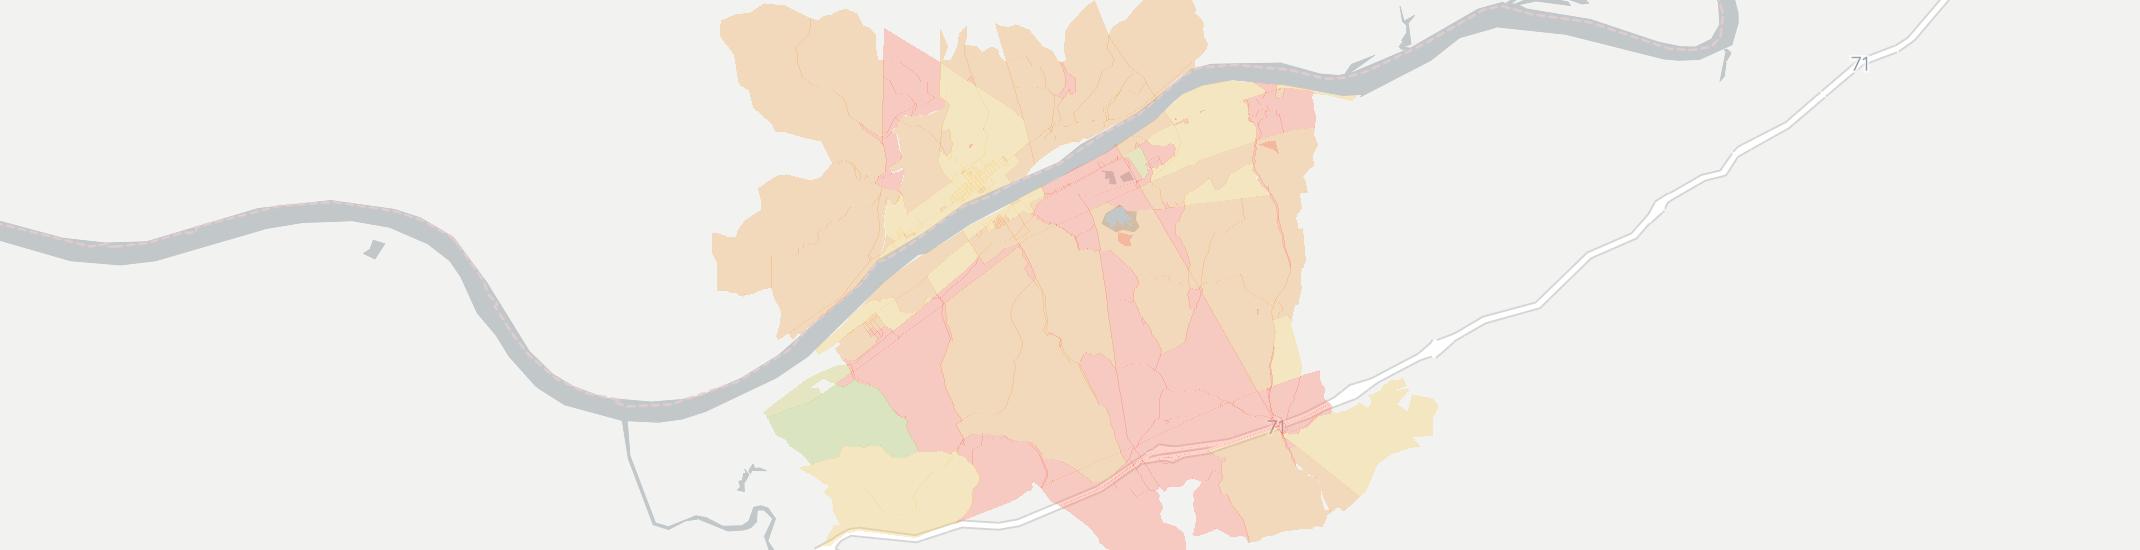 Ghent Internet Competition Map. Click for interactive map.